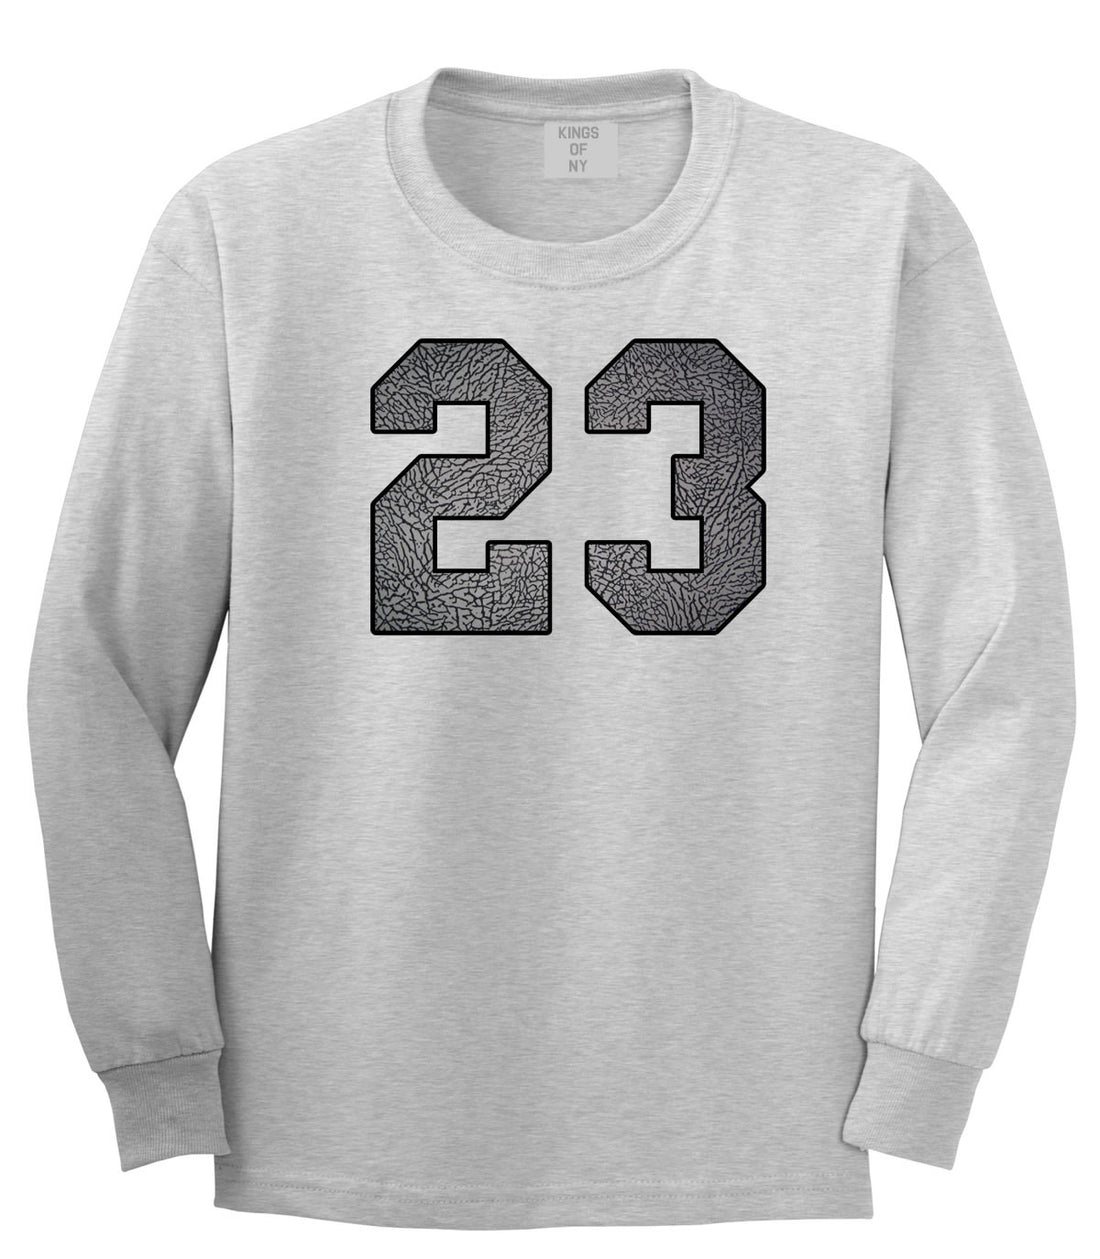 23 Cement Jersey Long Sleeve T-Shirt in Grey By Kings Of NY